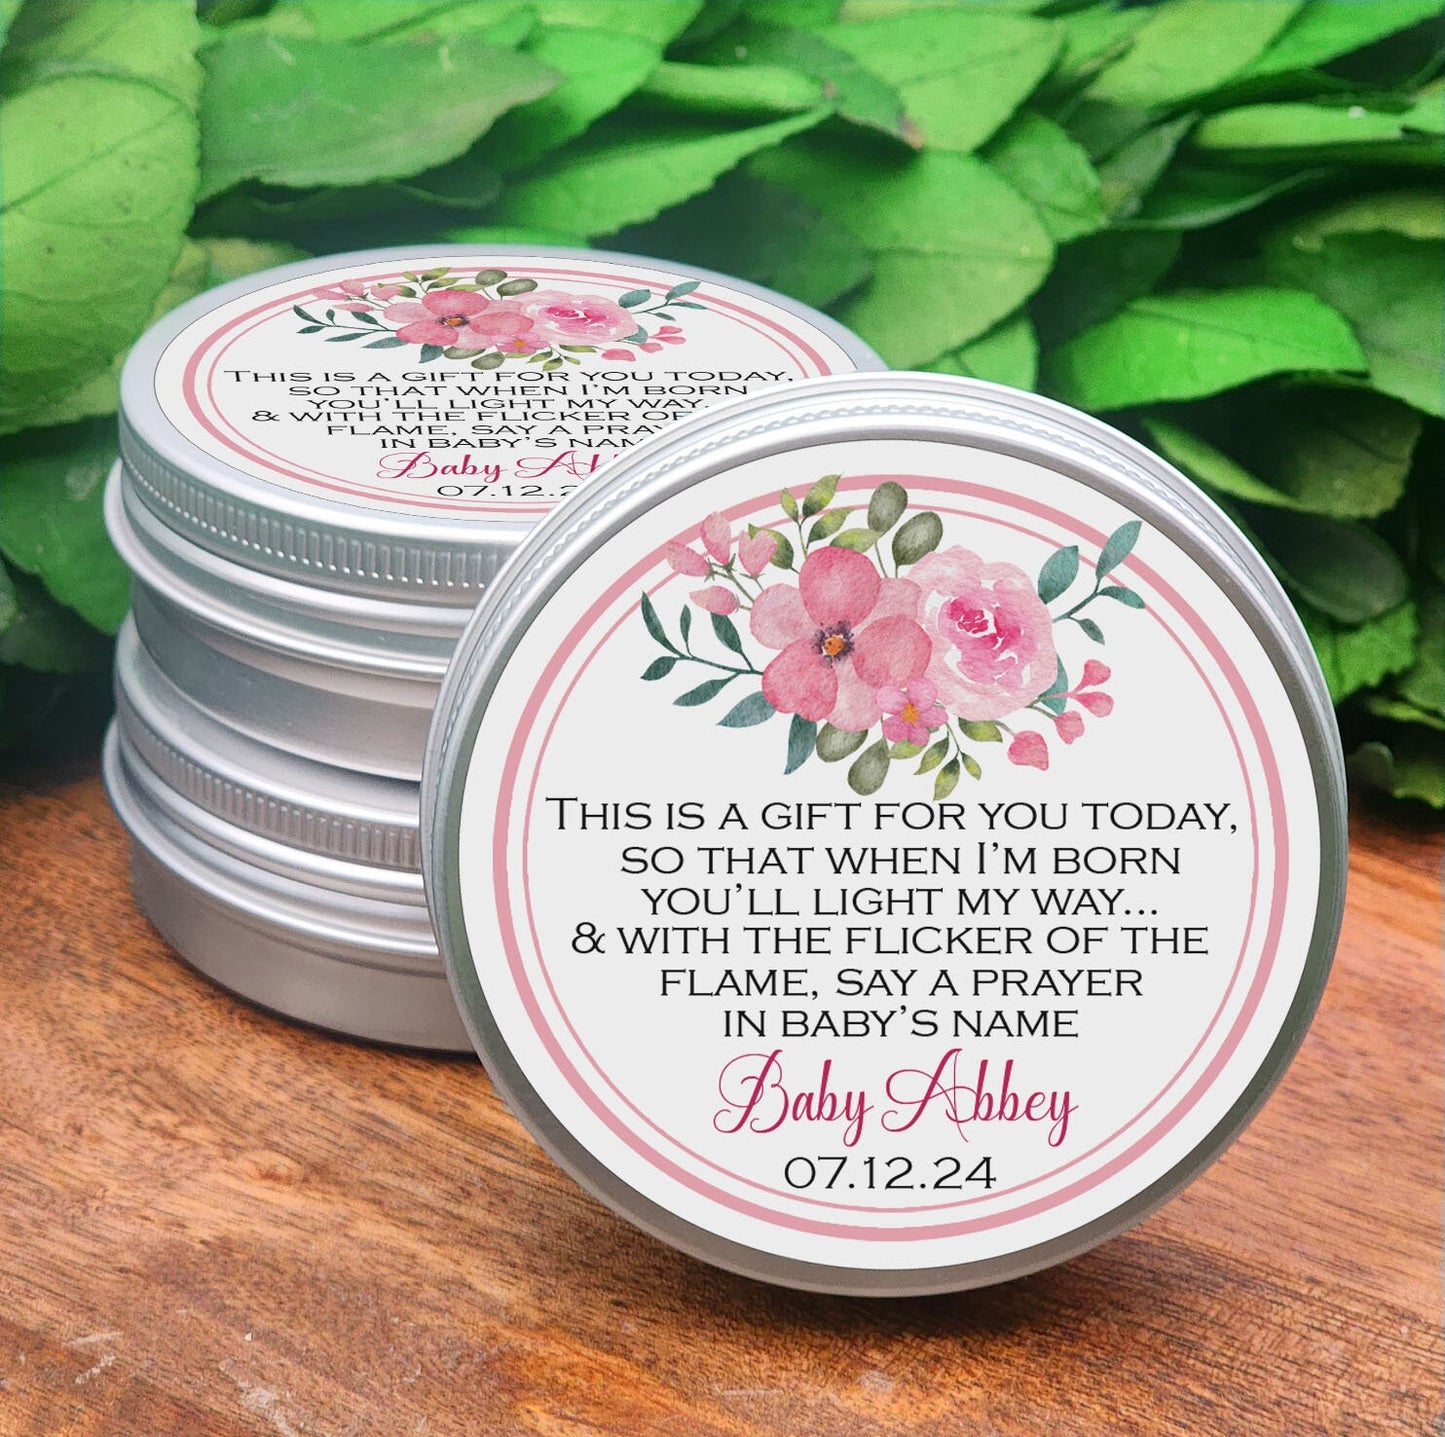 Baby in bloom baby shower - baby in bloom baby shower decor - baby in bloom baby shower favors - garden baby shower favors - prayer candle